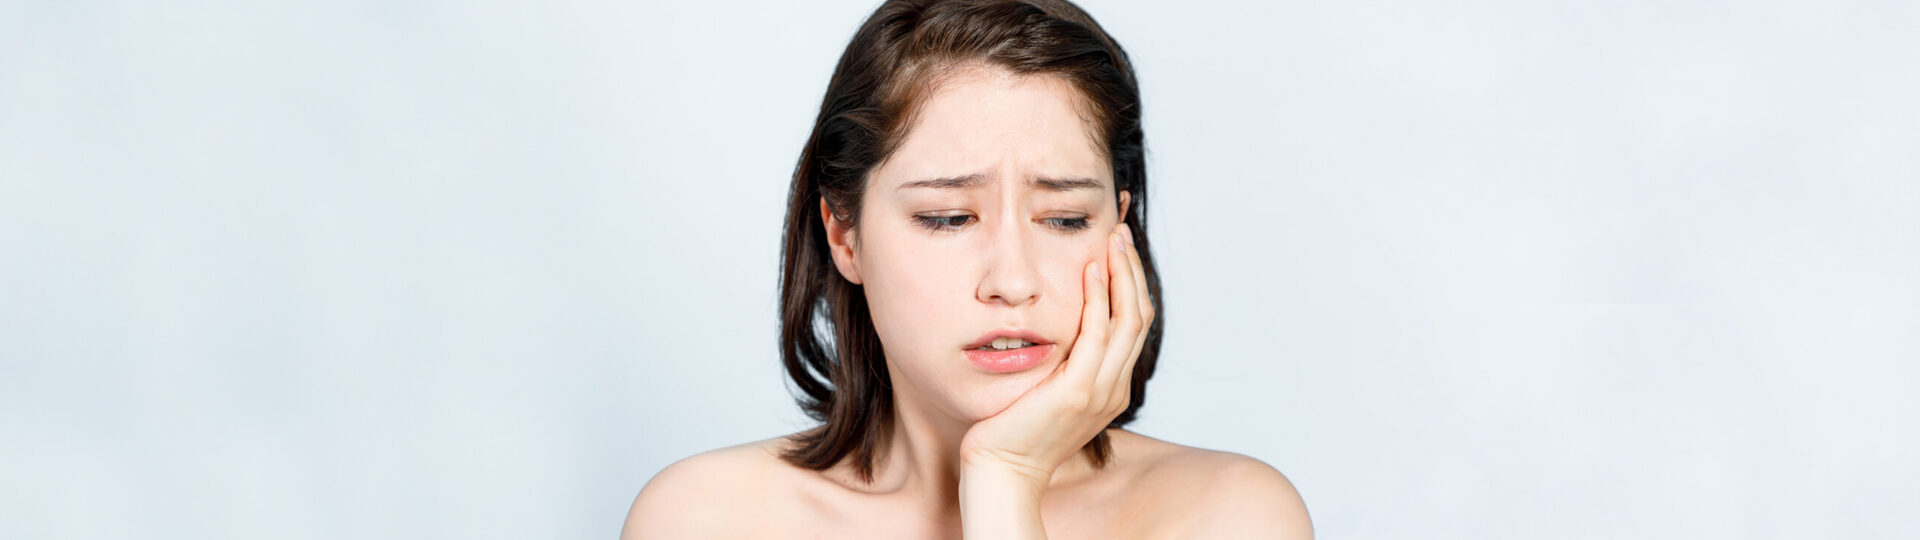 A Few Signs that You Might Have TMJ Disorder